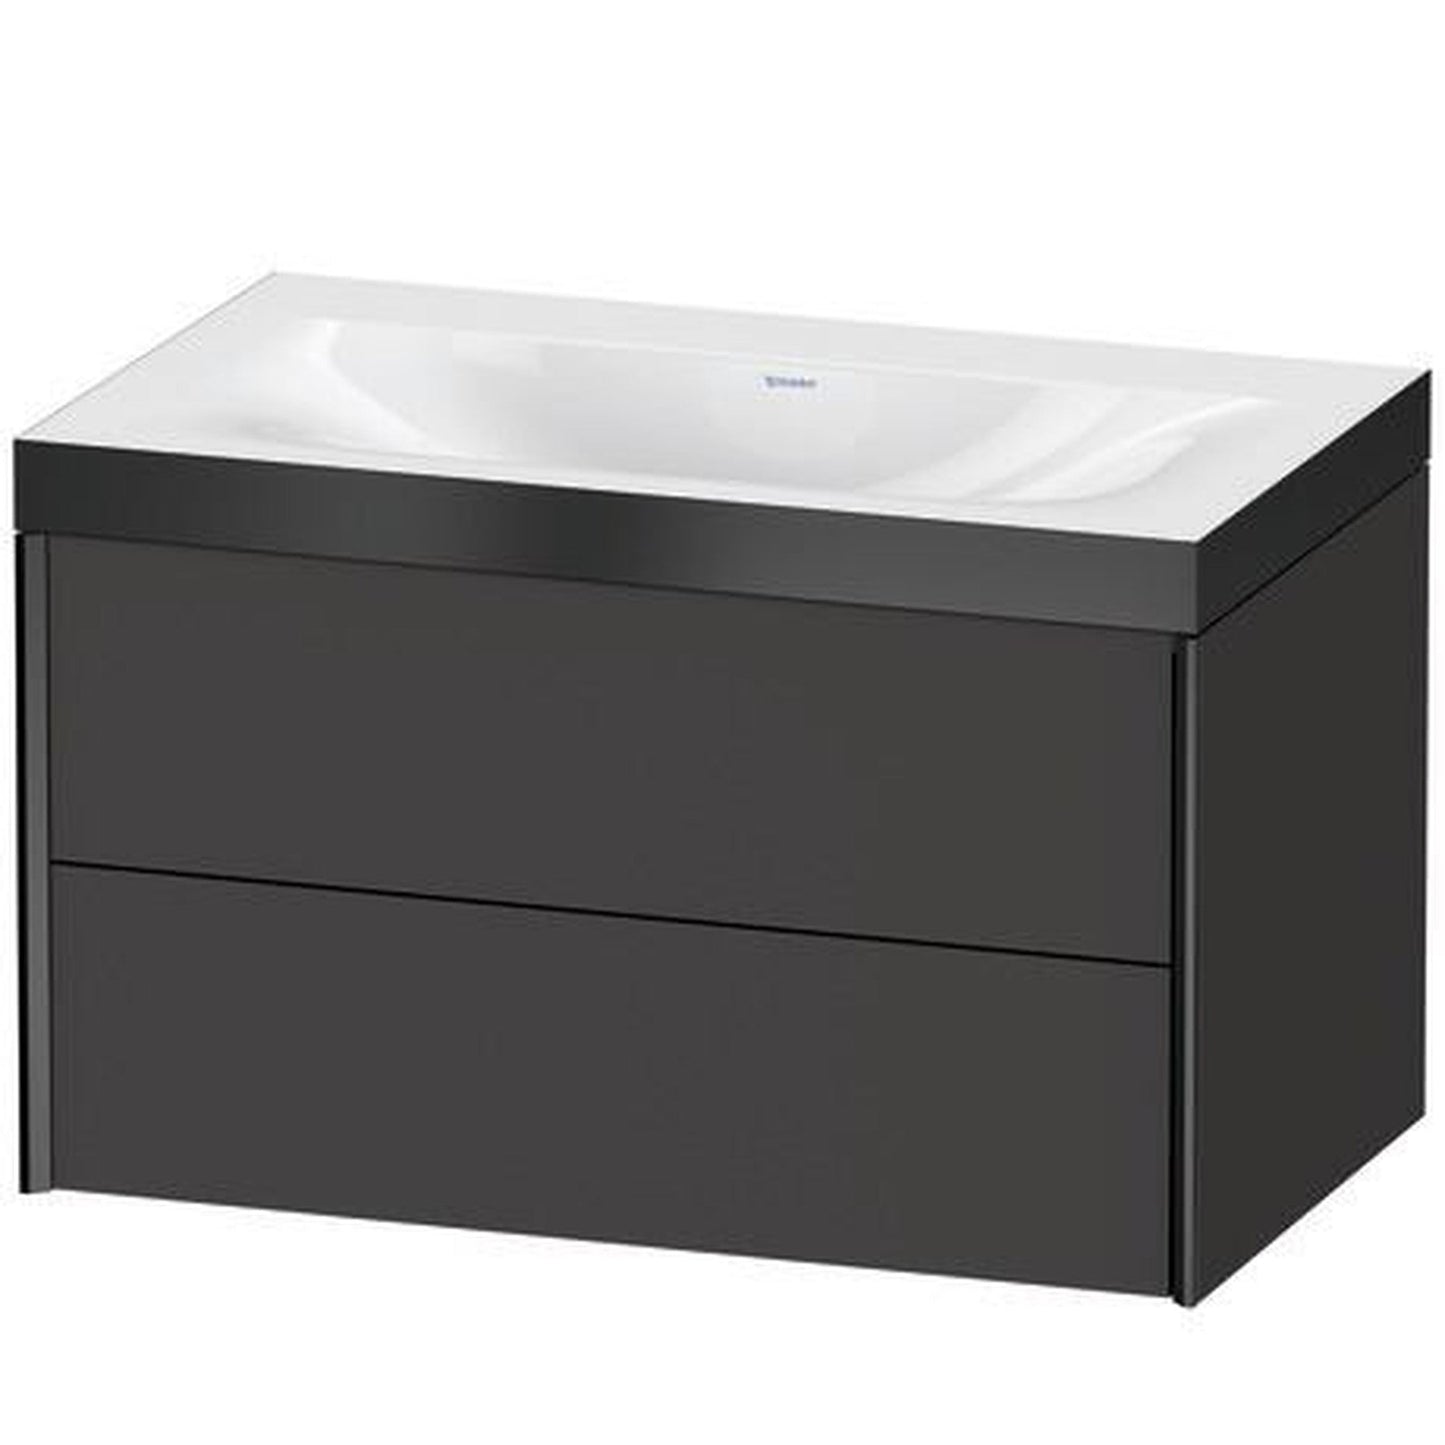 Duravit Xviu 31" x 20" x 19" Two Drawer C-Bonded Wall-Mount Vanity Kit Without Tap Hole, Graphite (XV4615NB280P)